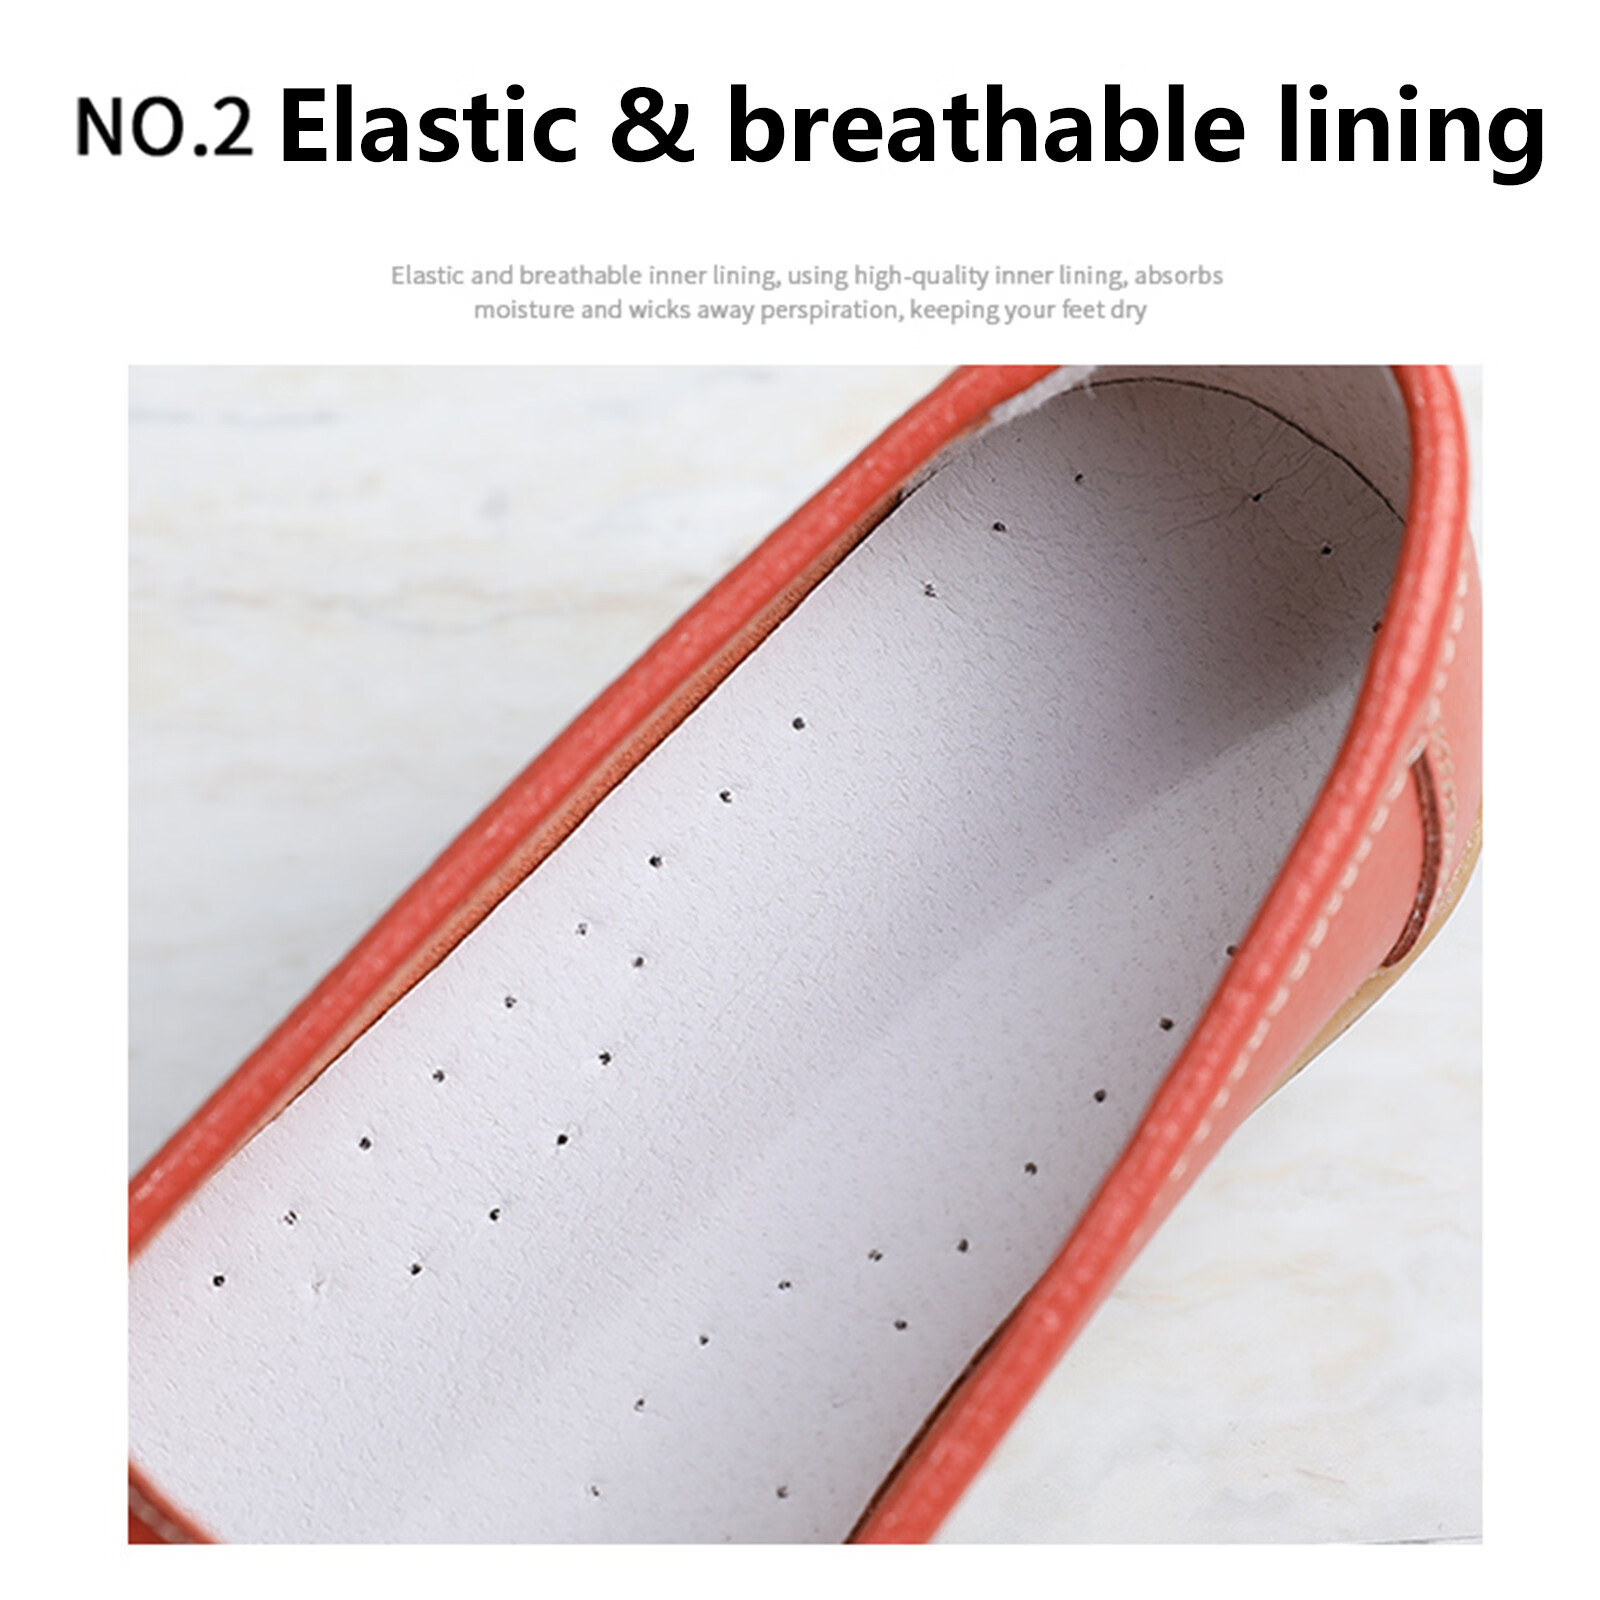 Womens Comfort Walking Flat Loafer Slip On Leather Loafer Comfortable Flat Shoes Outdoor Driving Shoes PU Orange Flats Shoes for Women - image 4 of 6